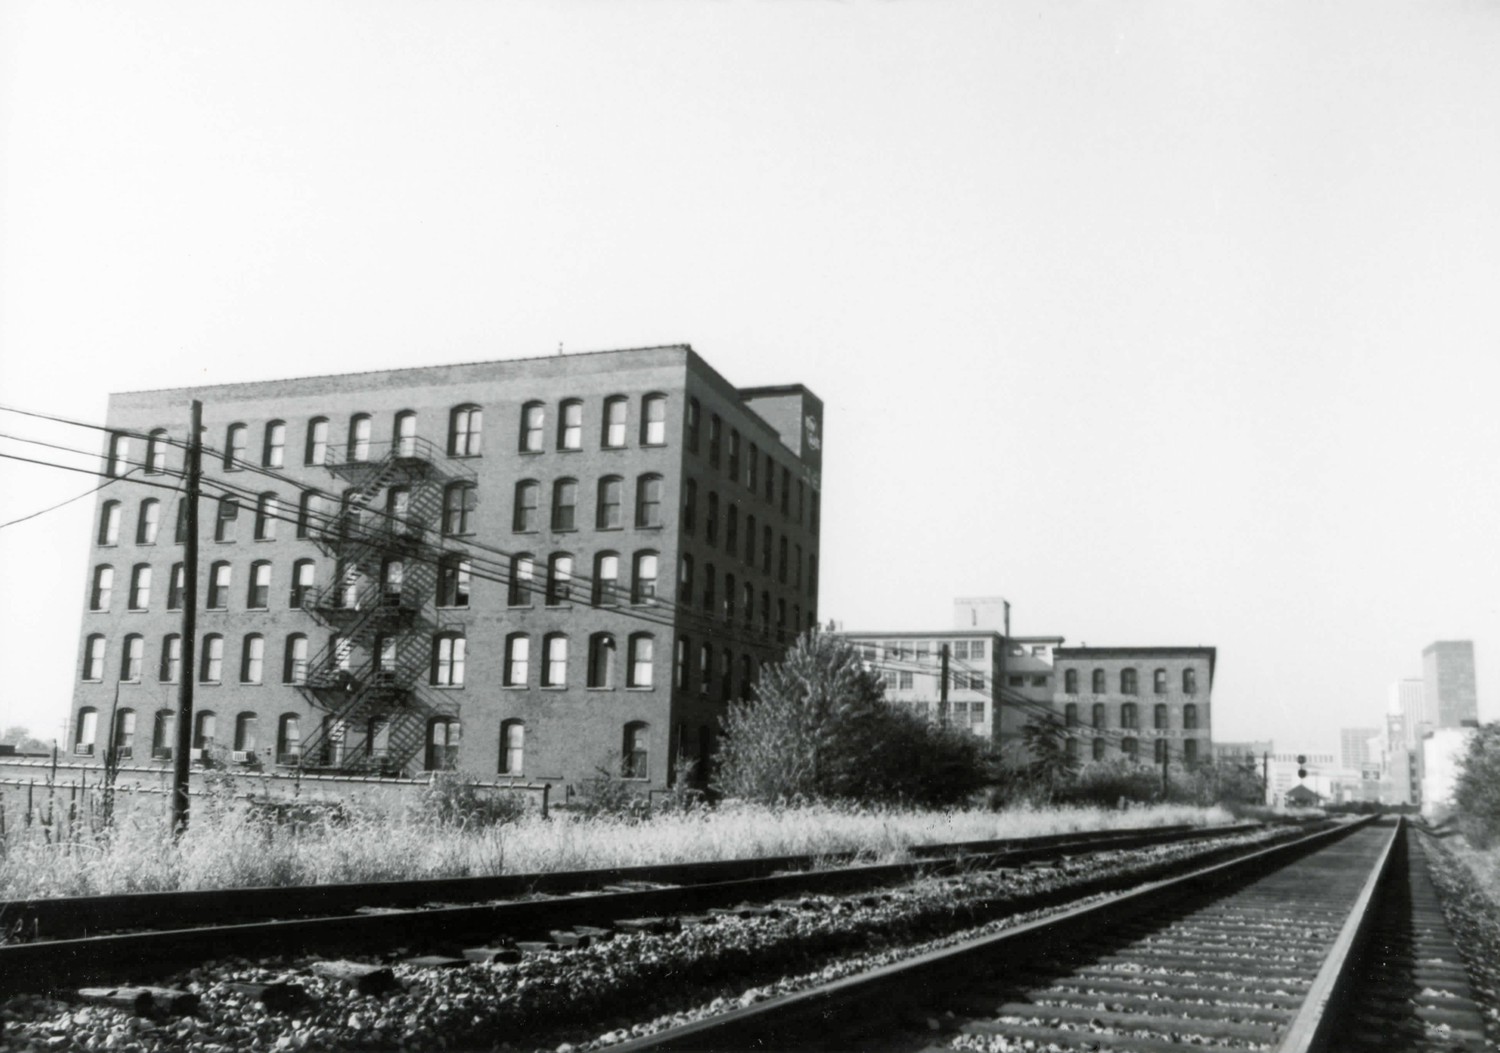 125 Bacon St.; view along railroad tracks looking west; looking SW. (1982)